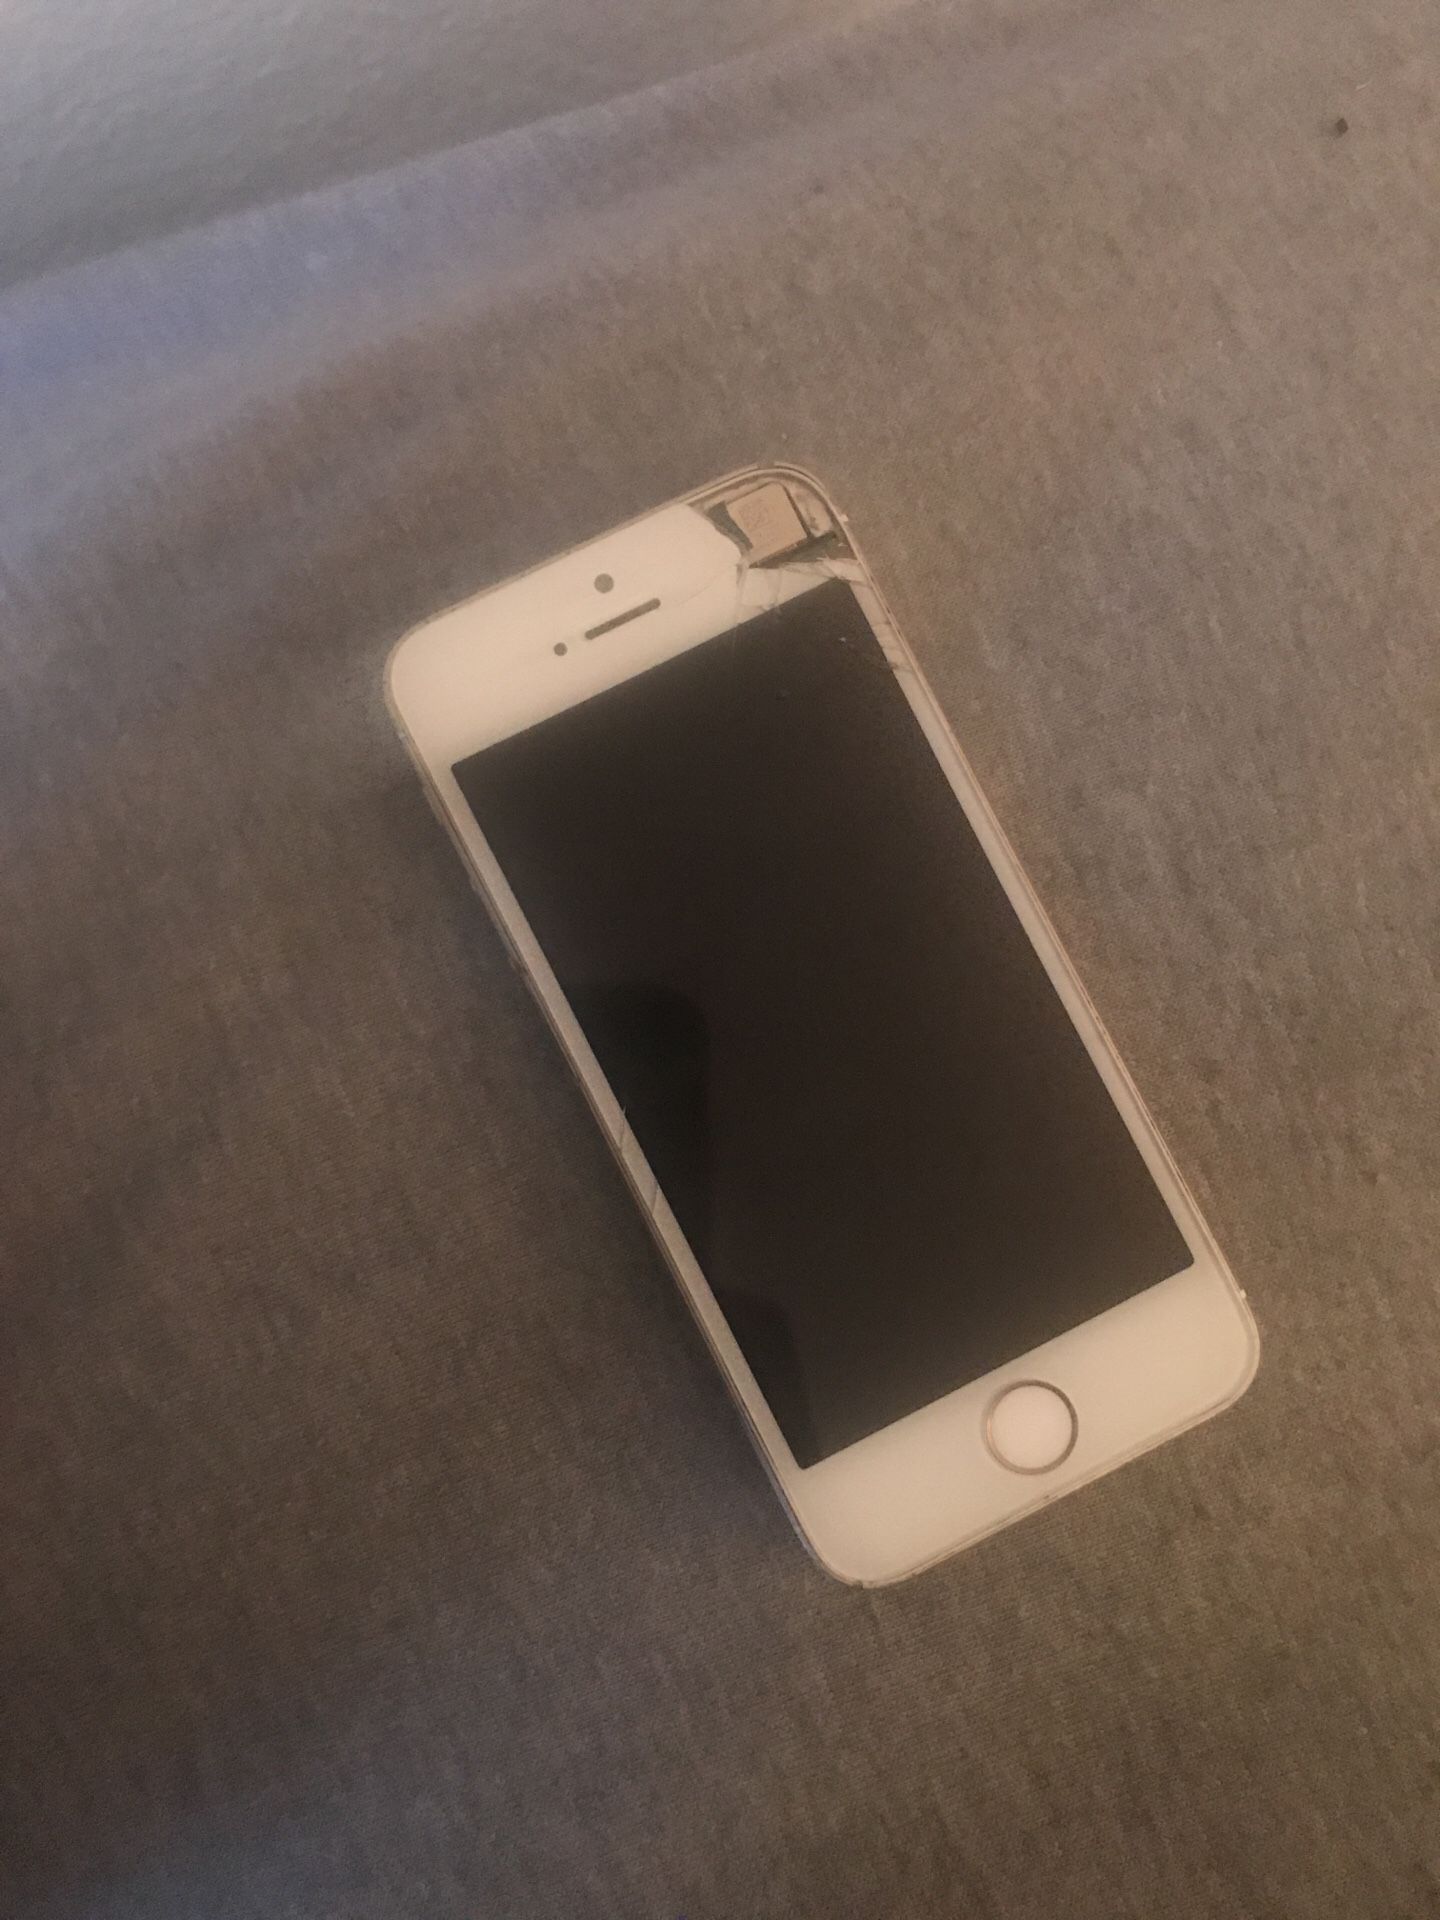 iPhone 5s for 40$